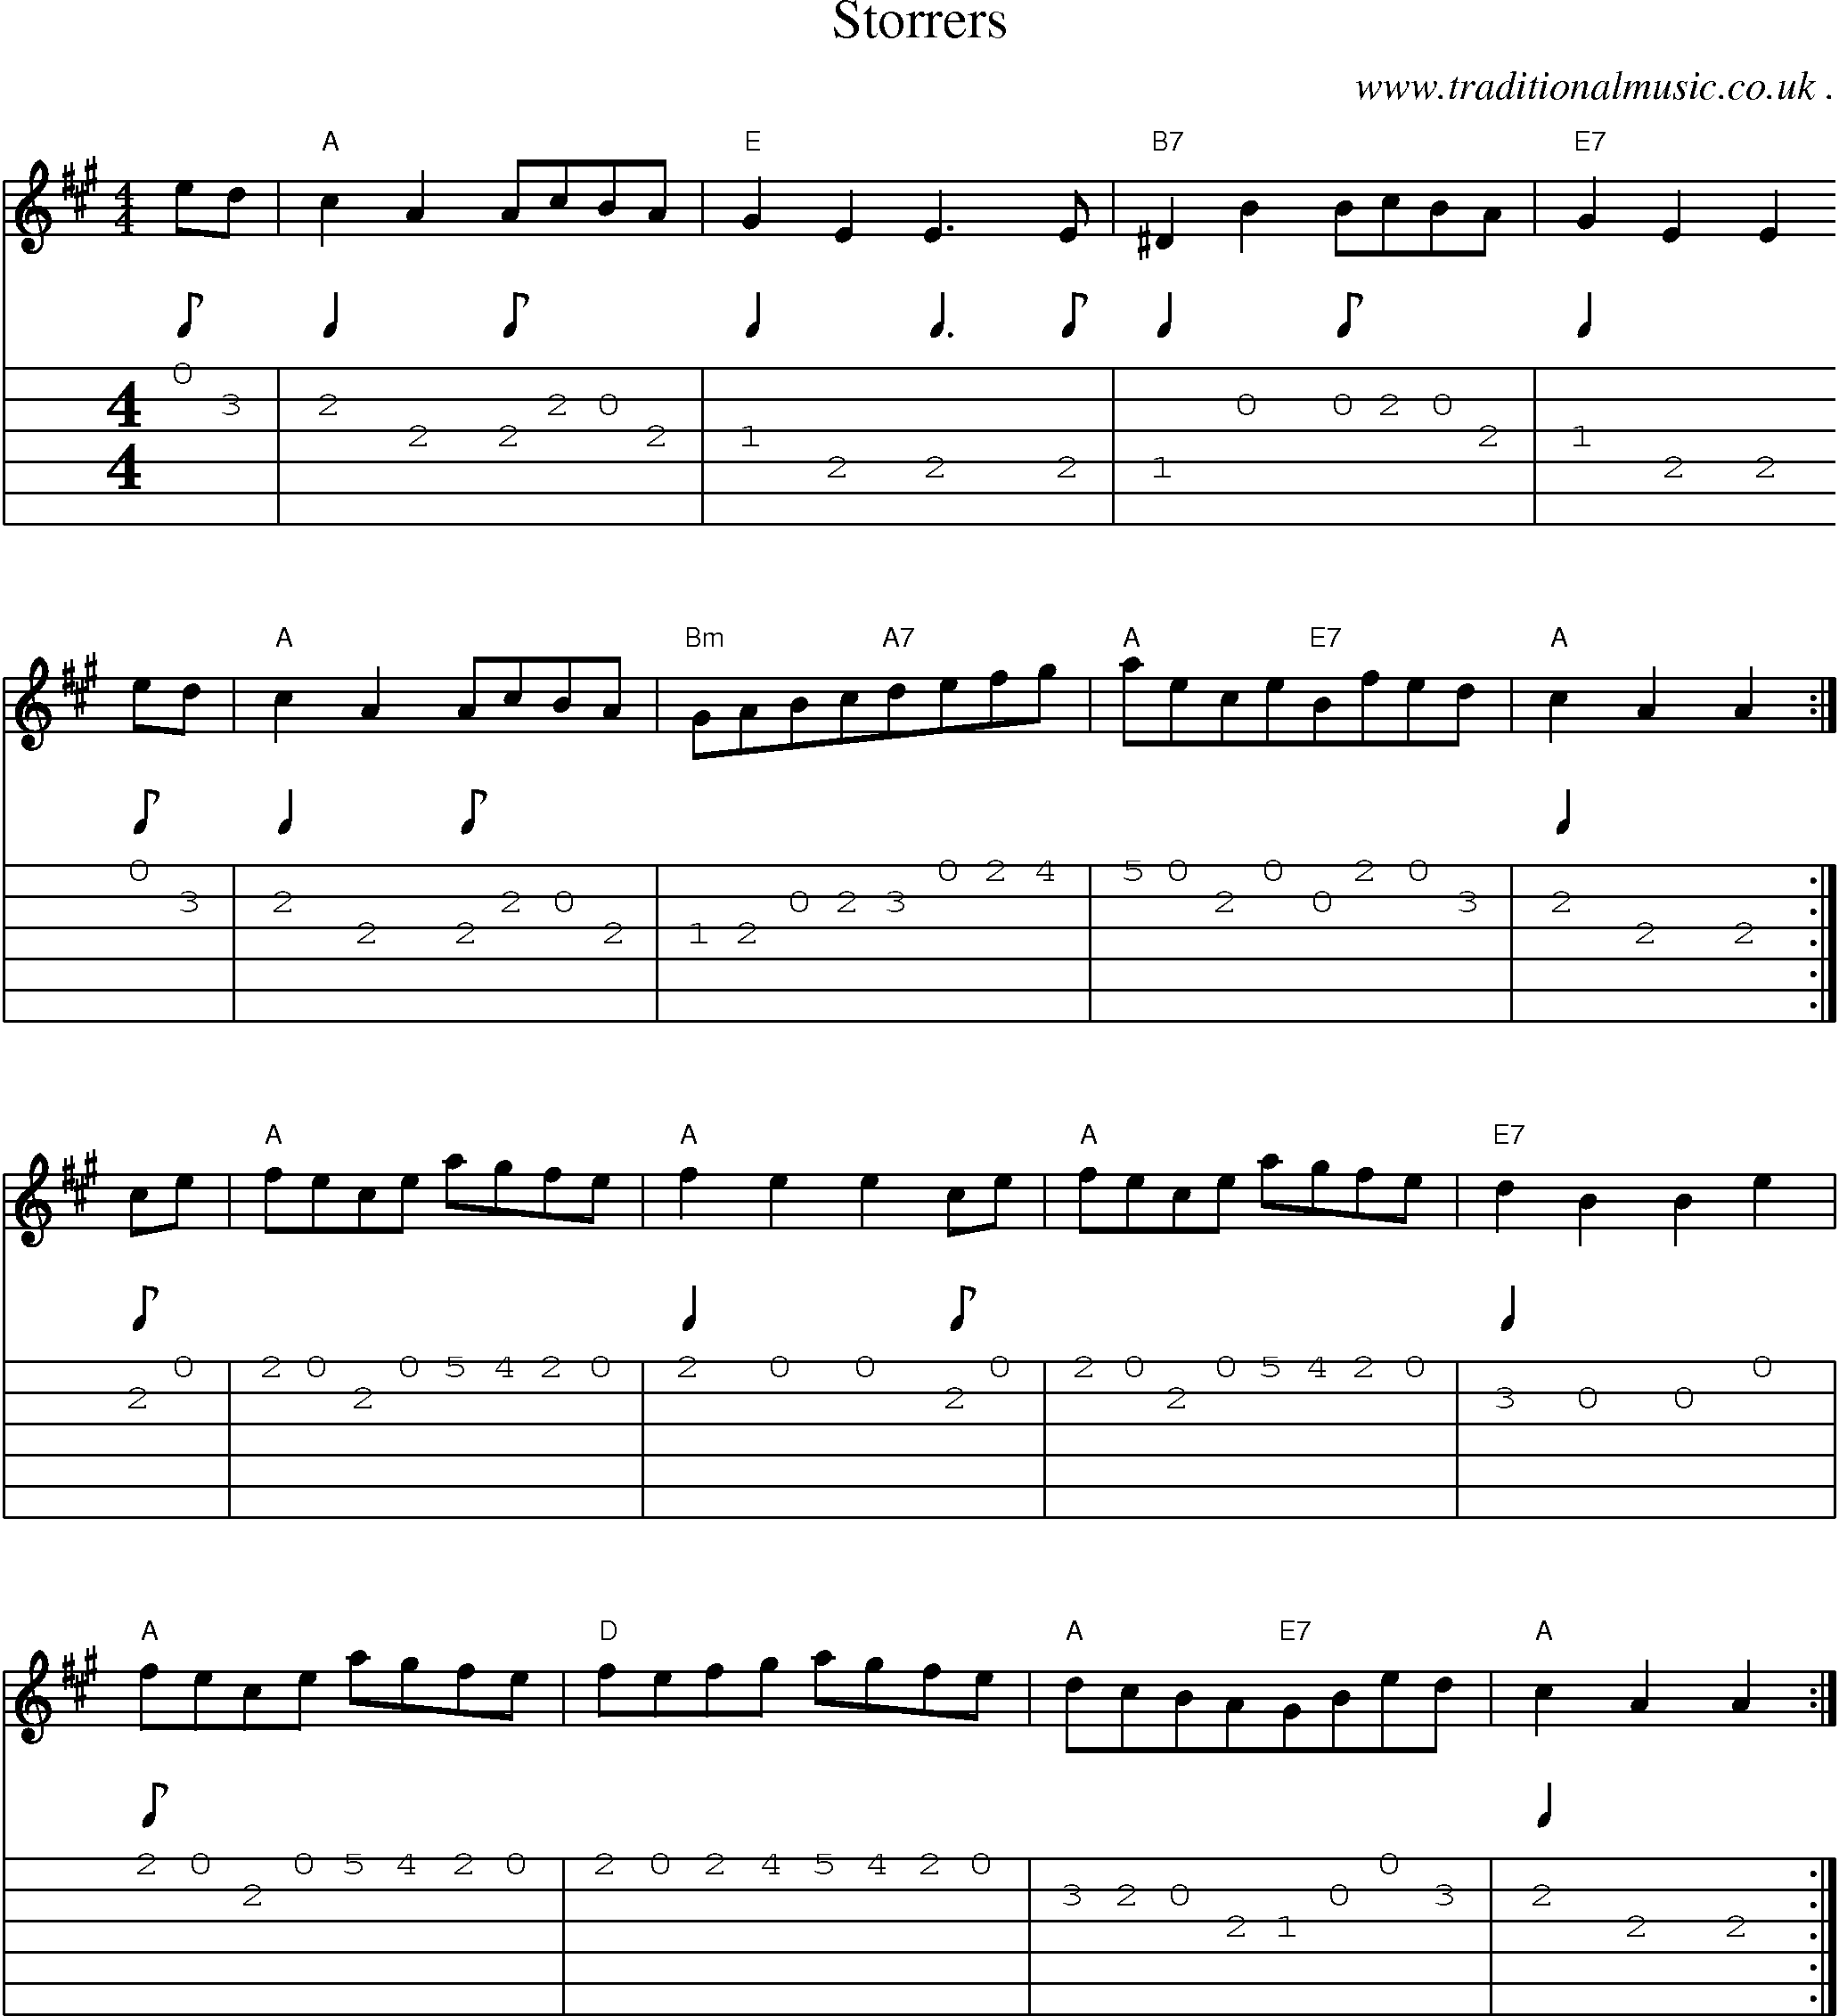 Sheet-Music and Guitar Tabs for Storrers